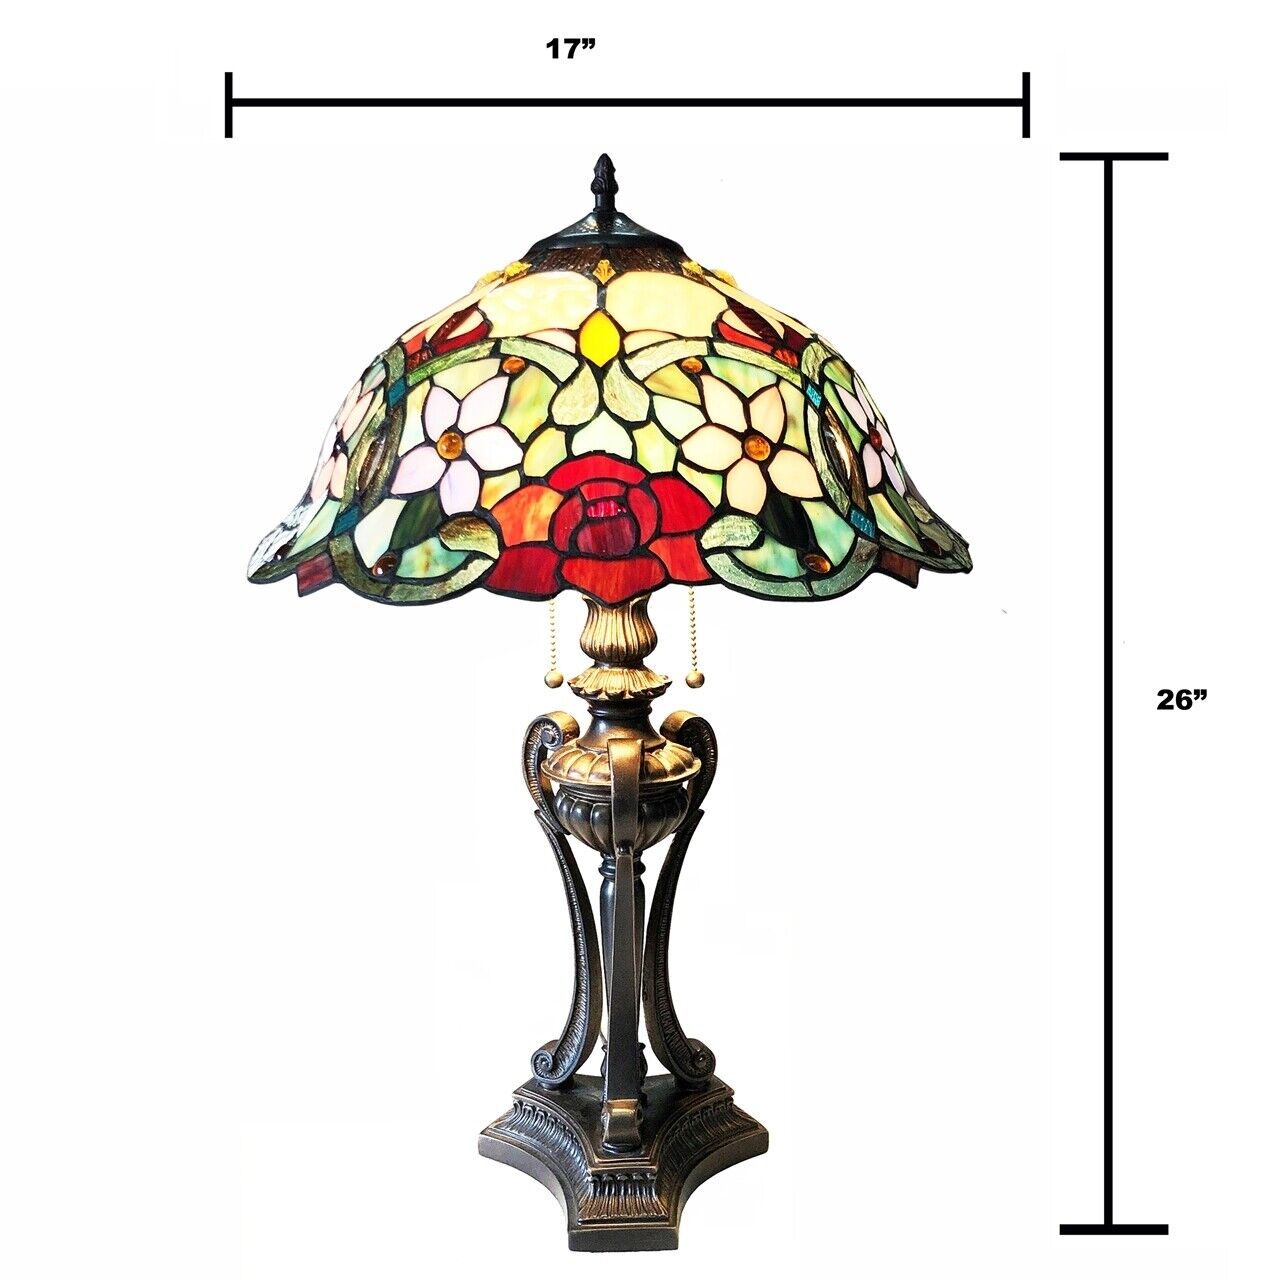 26" Antique Vintage Style Stained Glass Rose Floral Table Lamp